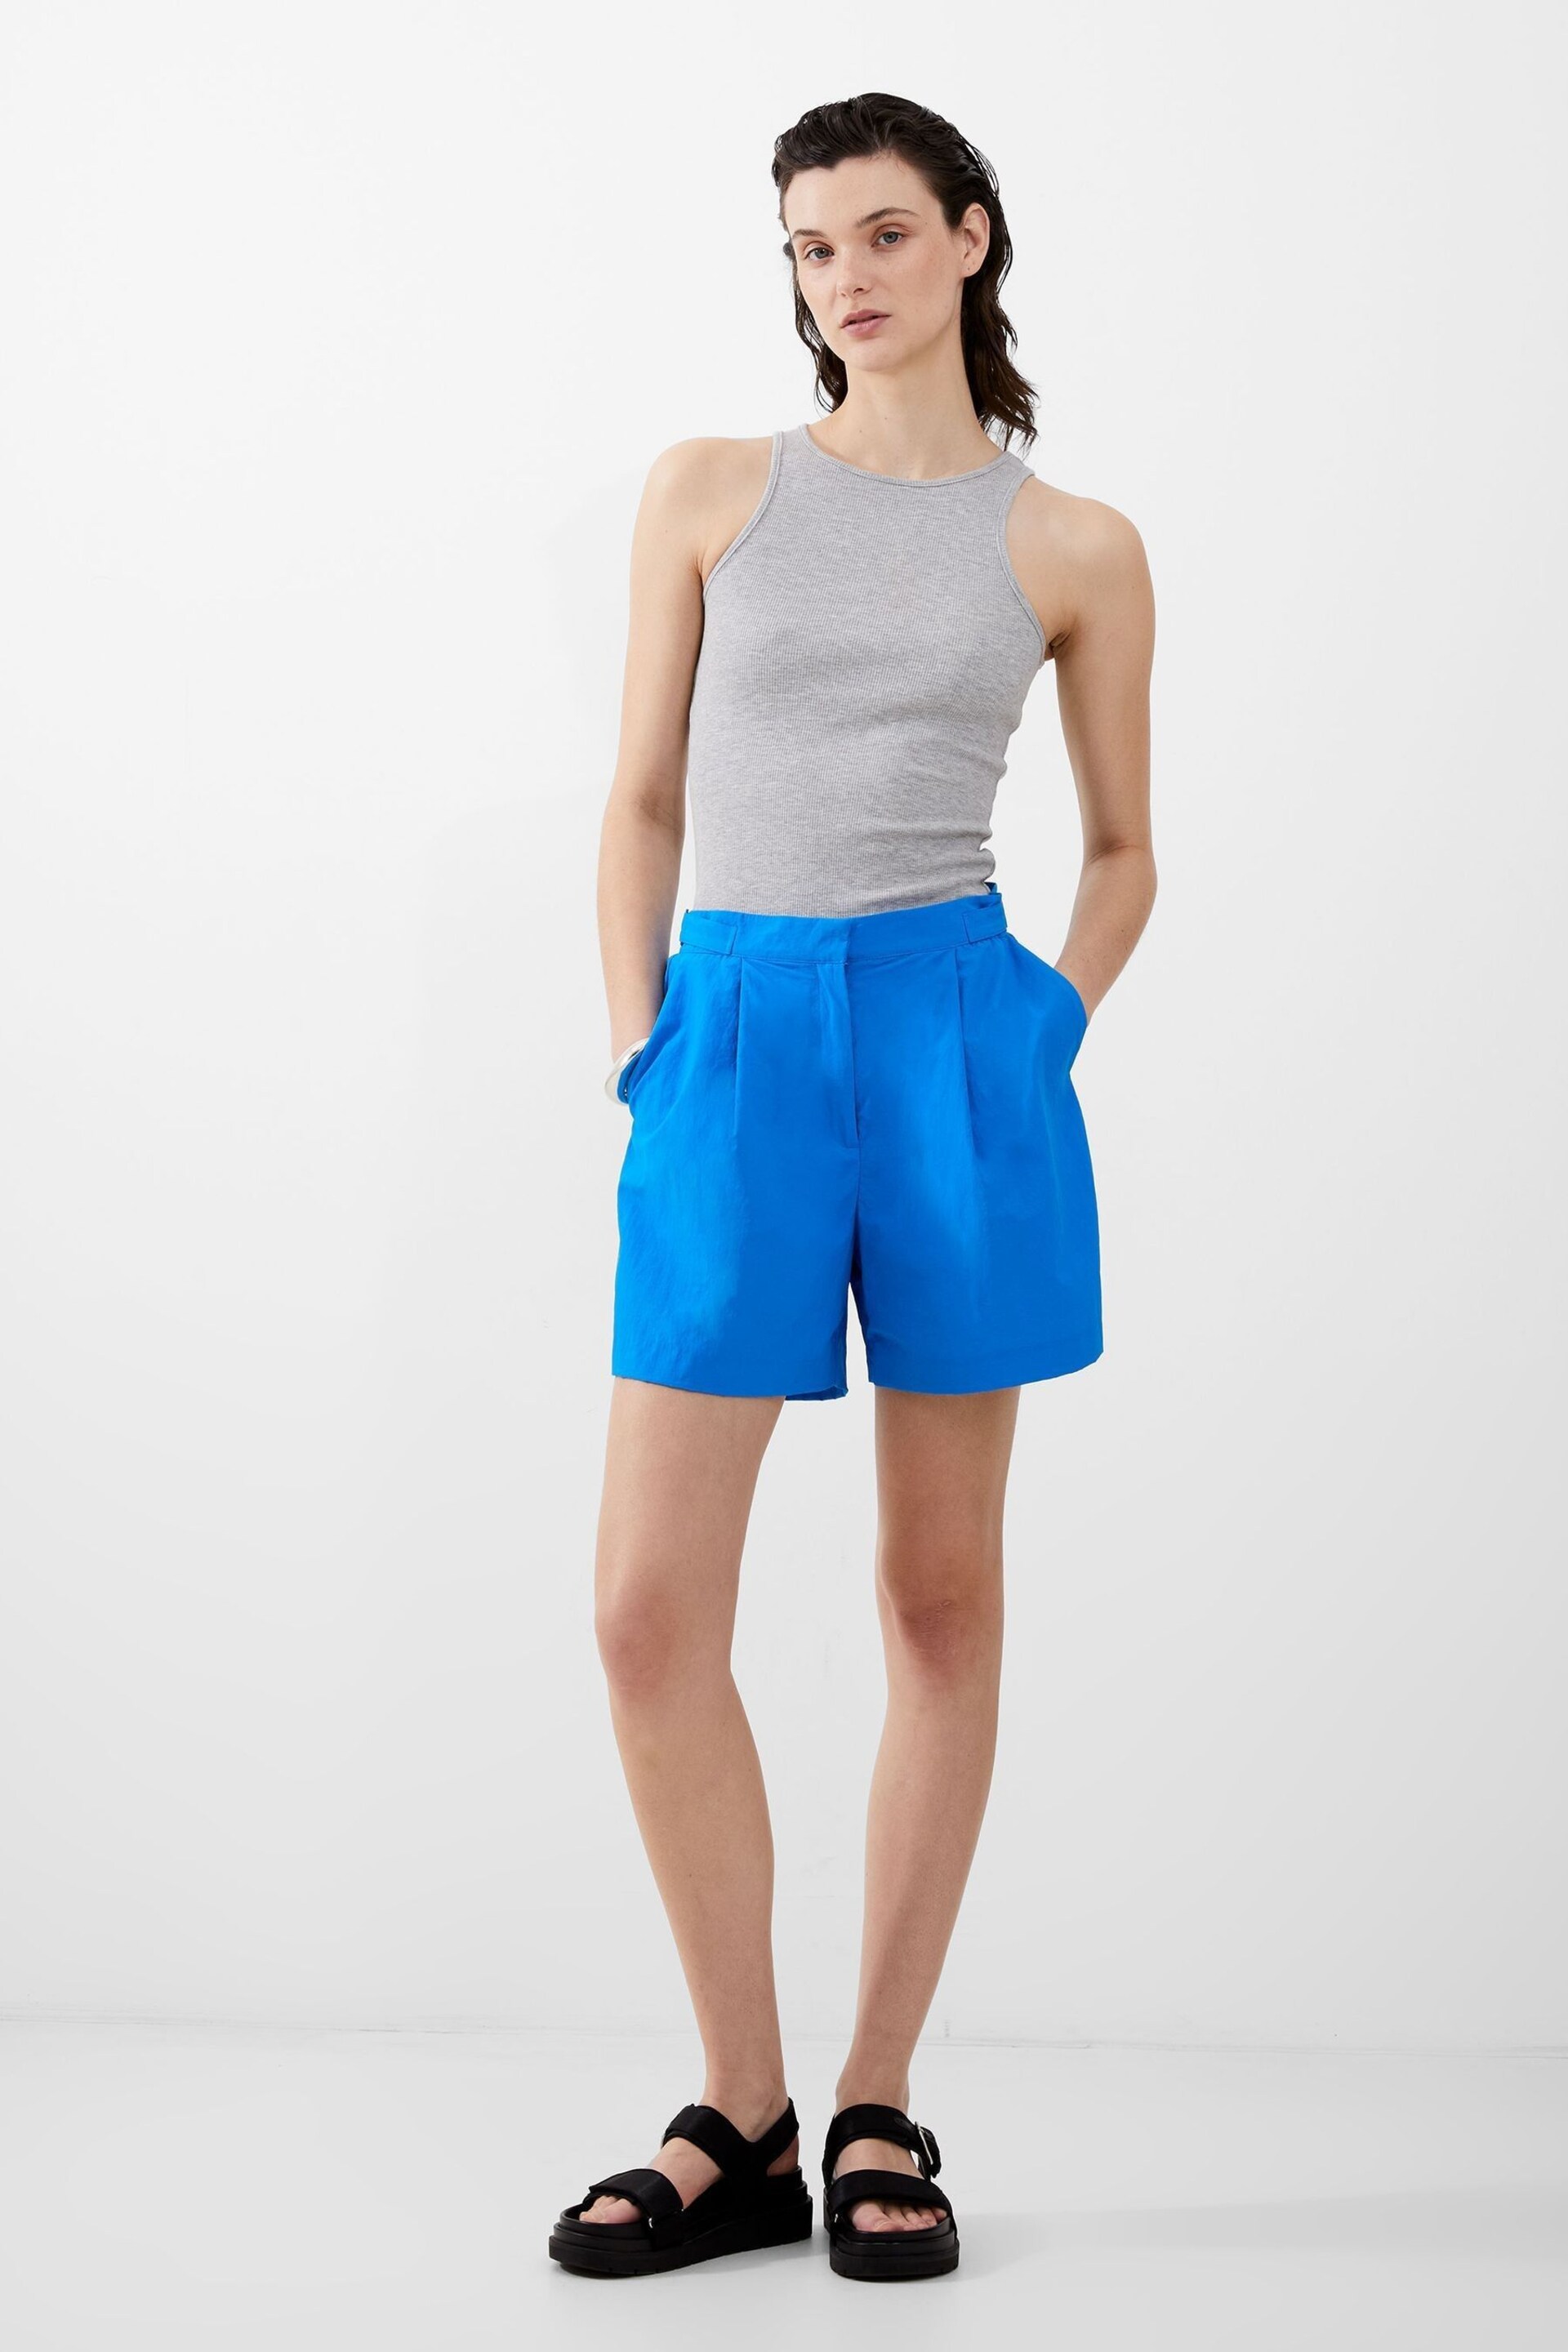 French Connection Alora Shorts - Image 1 of 4